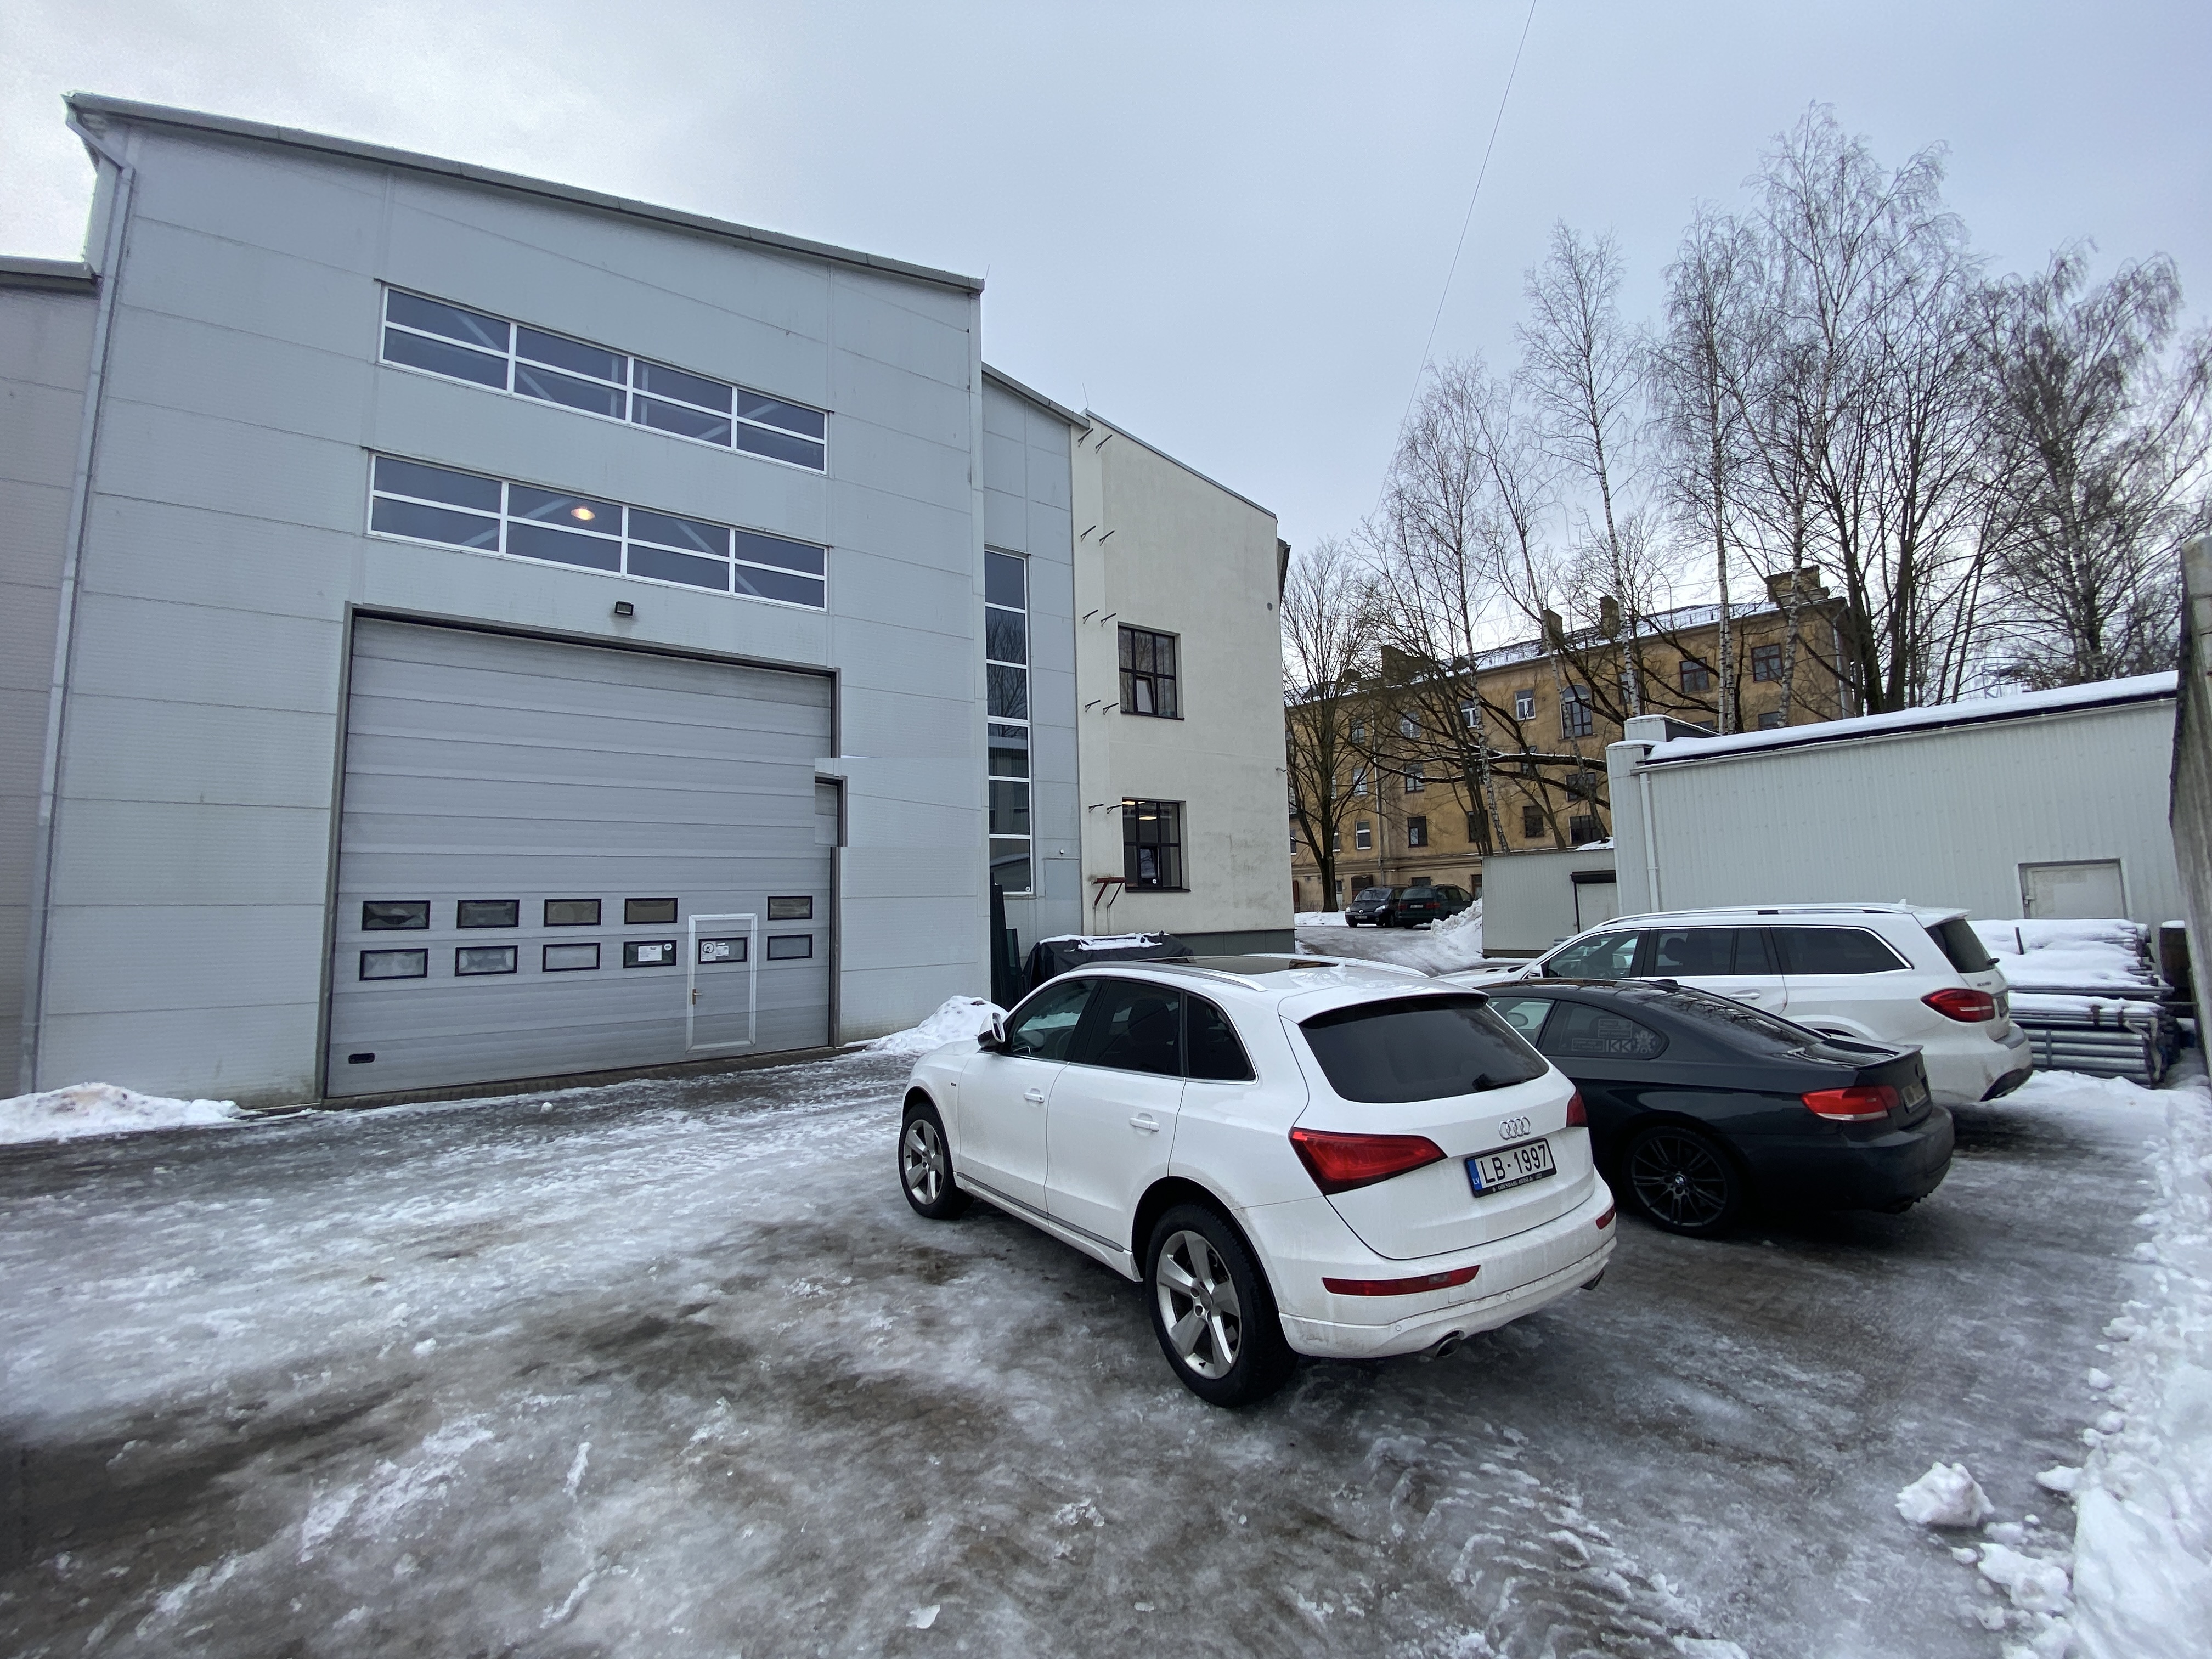 Warehouse for rent, Liepājas street - Image 1